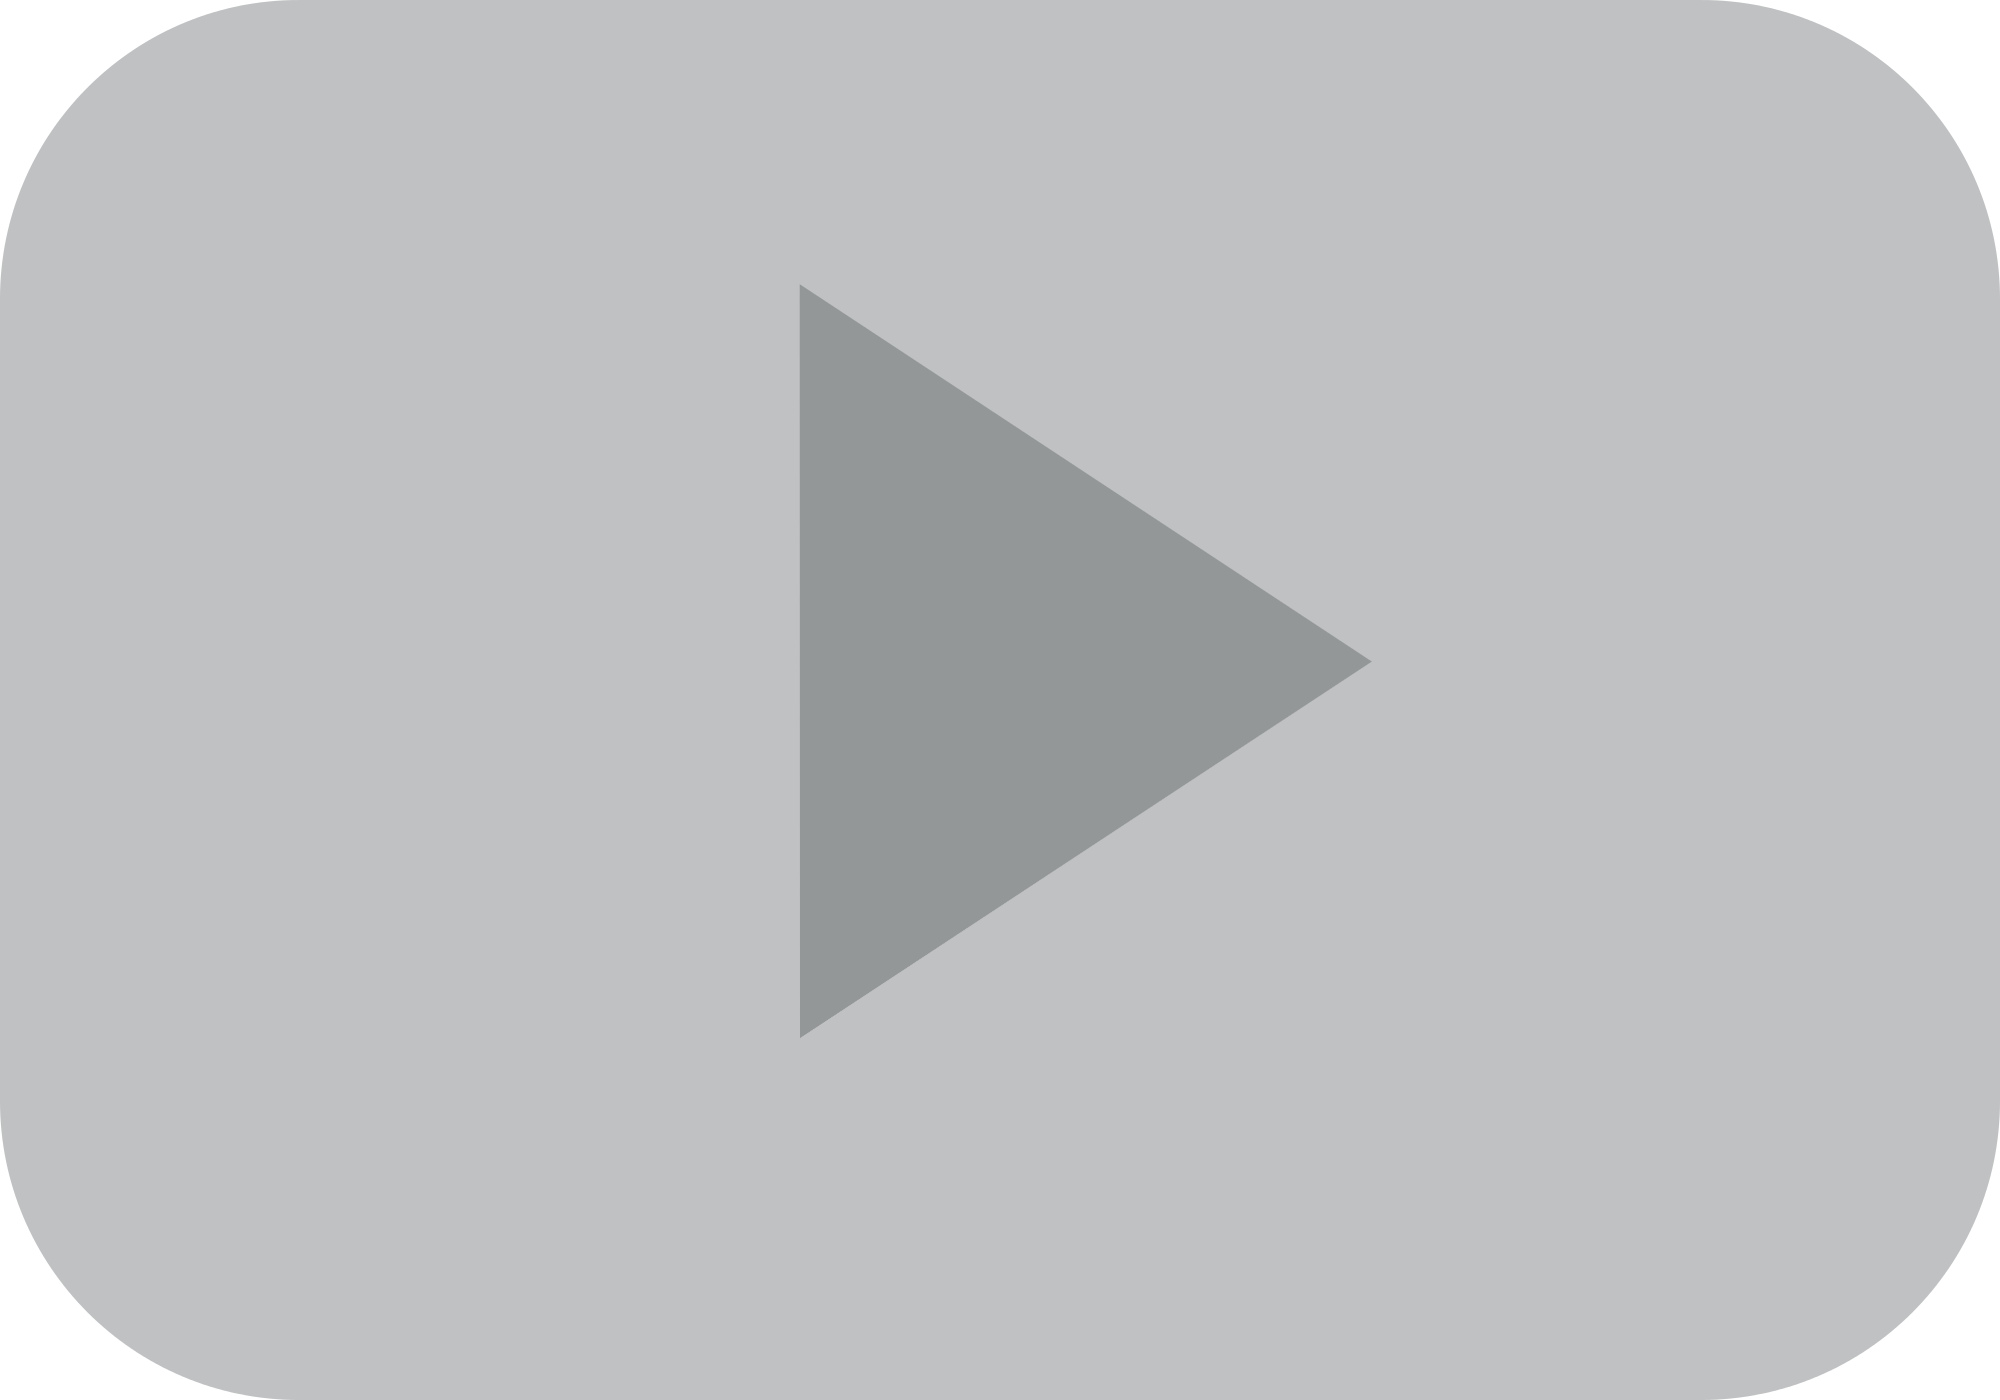 File:YouTube Silver Play Button - Wikimedia Commons